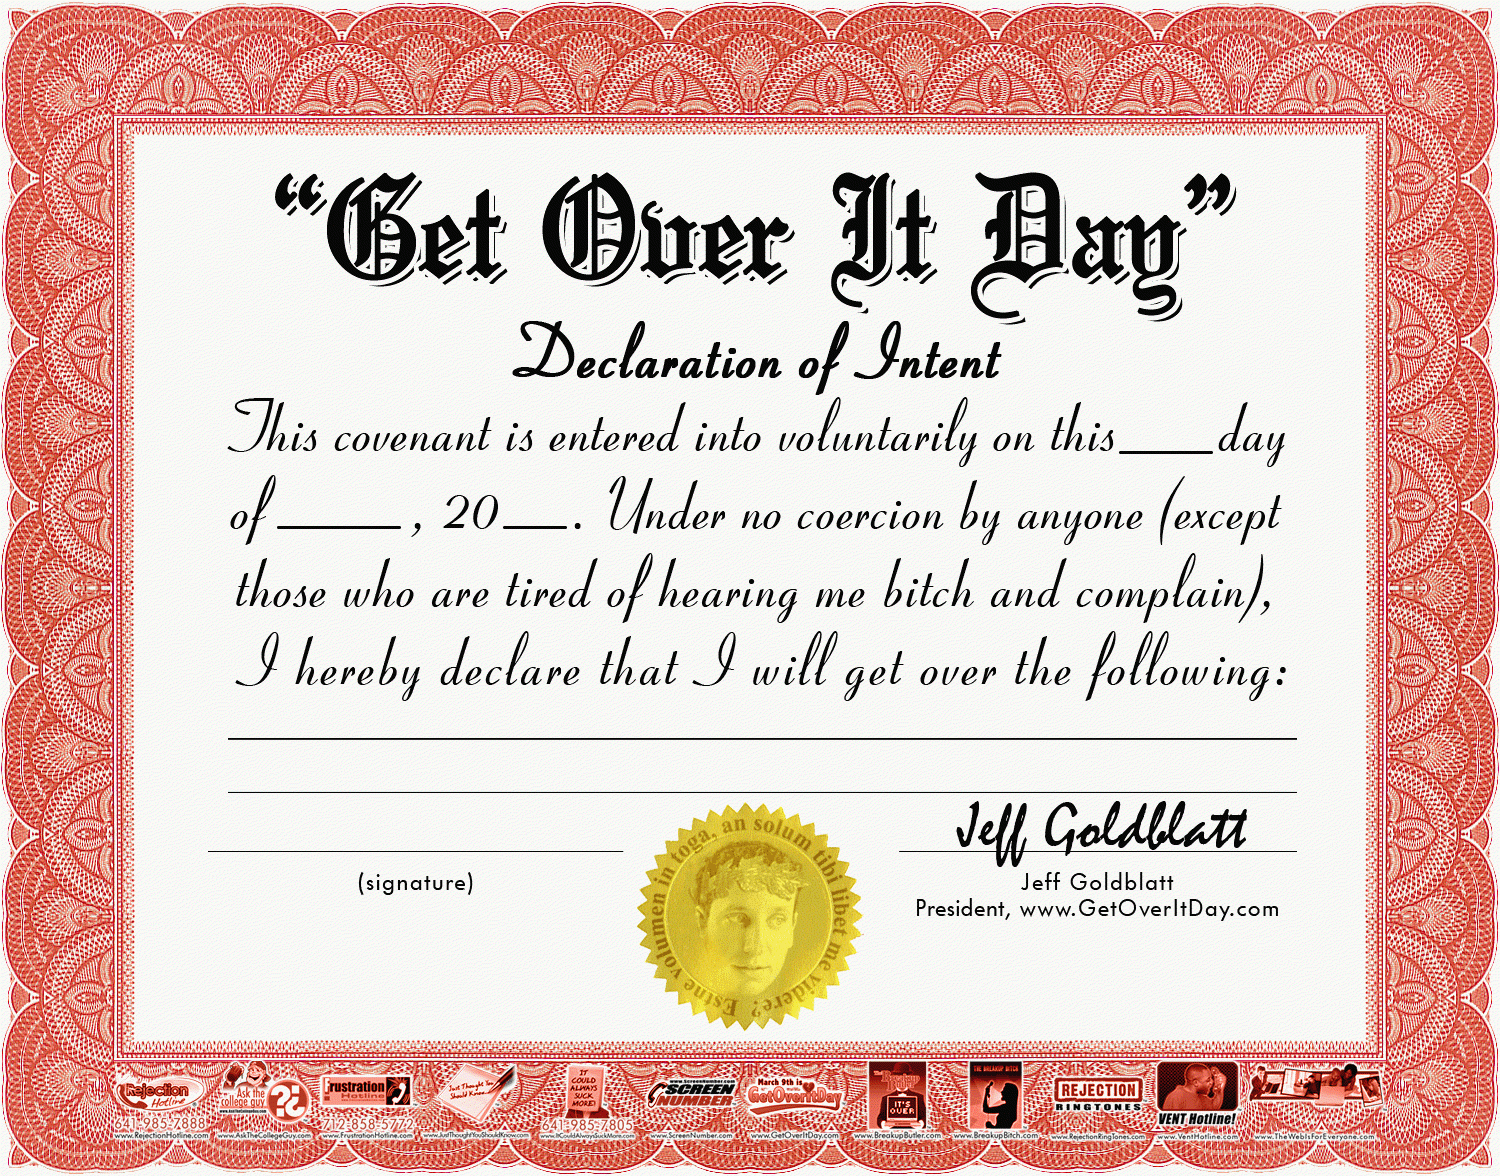 Funny Office Awards Youtube. Silly Certificates Funny Awards In Funny Certificates For Employees Templates